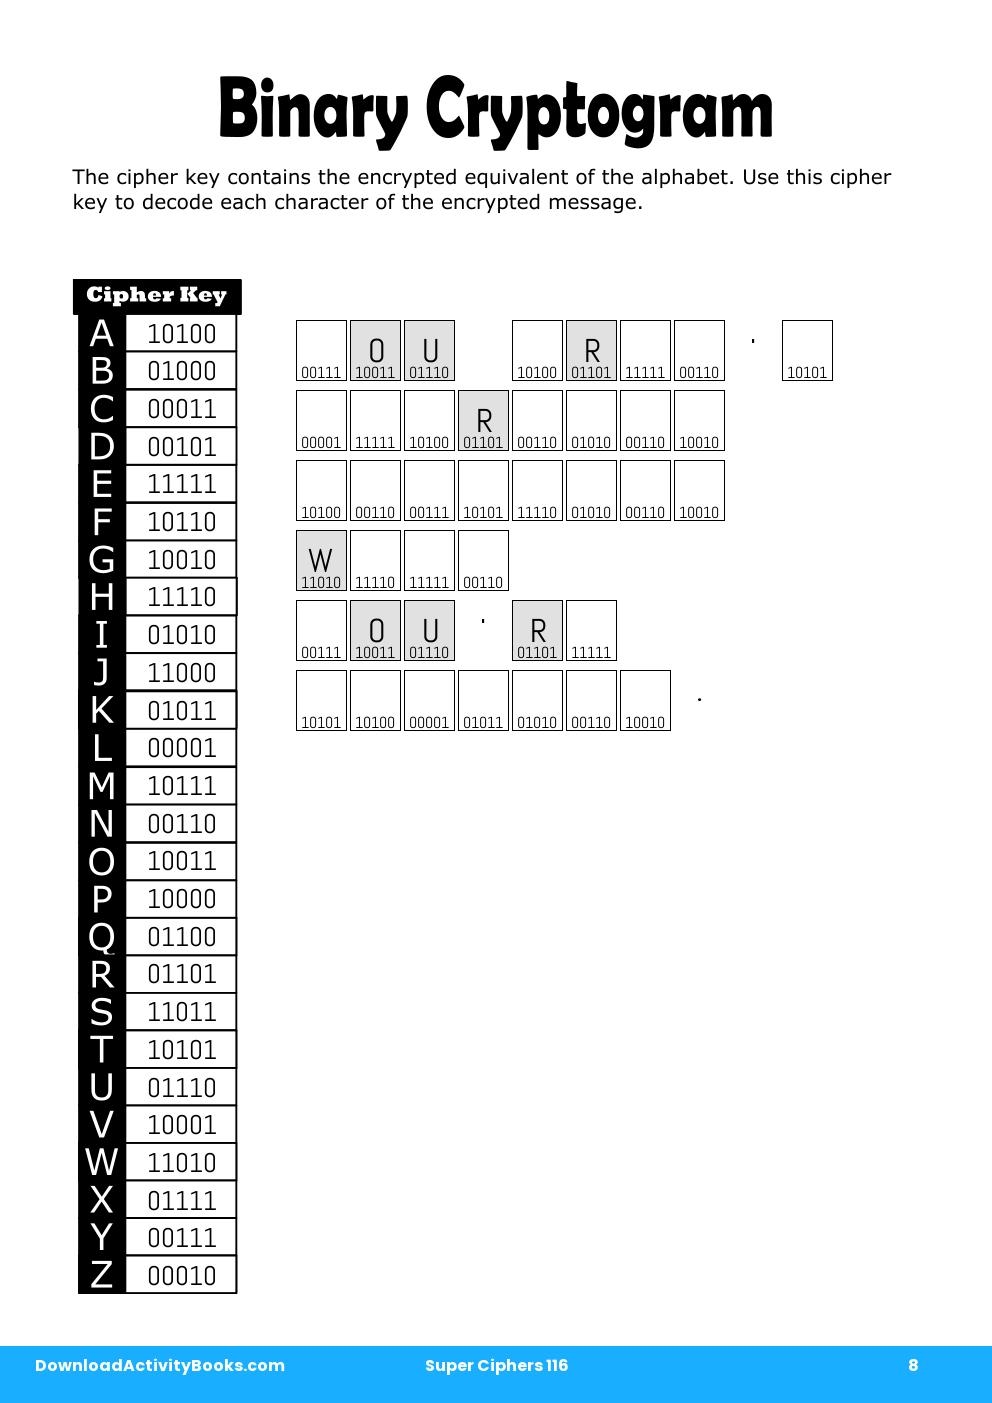 Binary Cryptogram in Super Ciphers 116